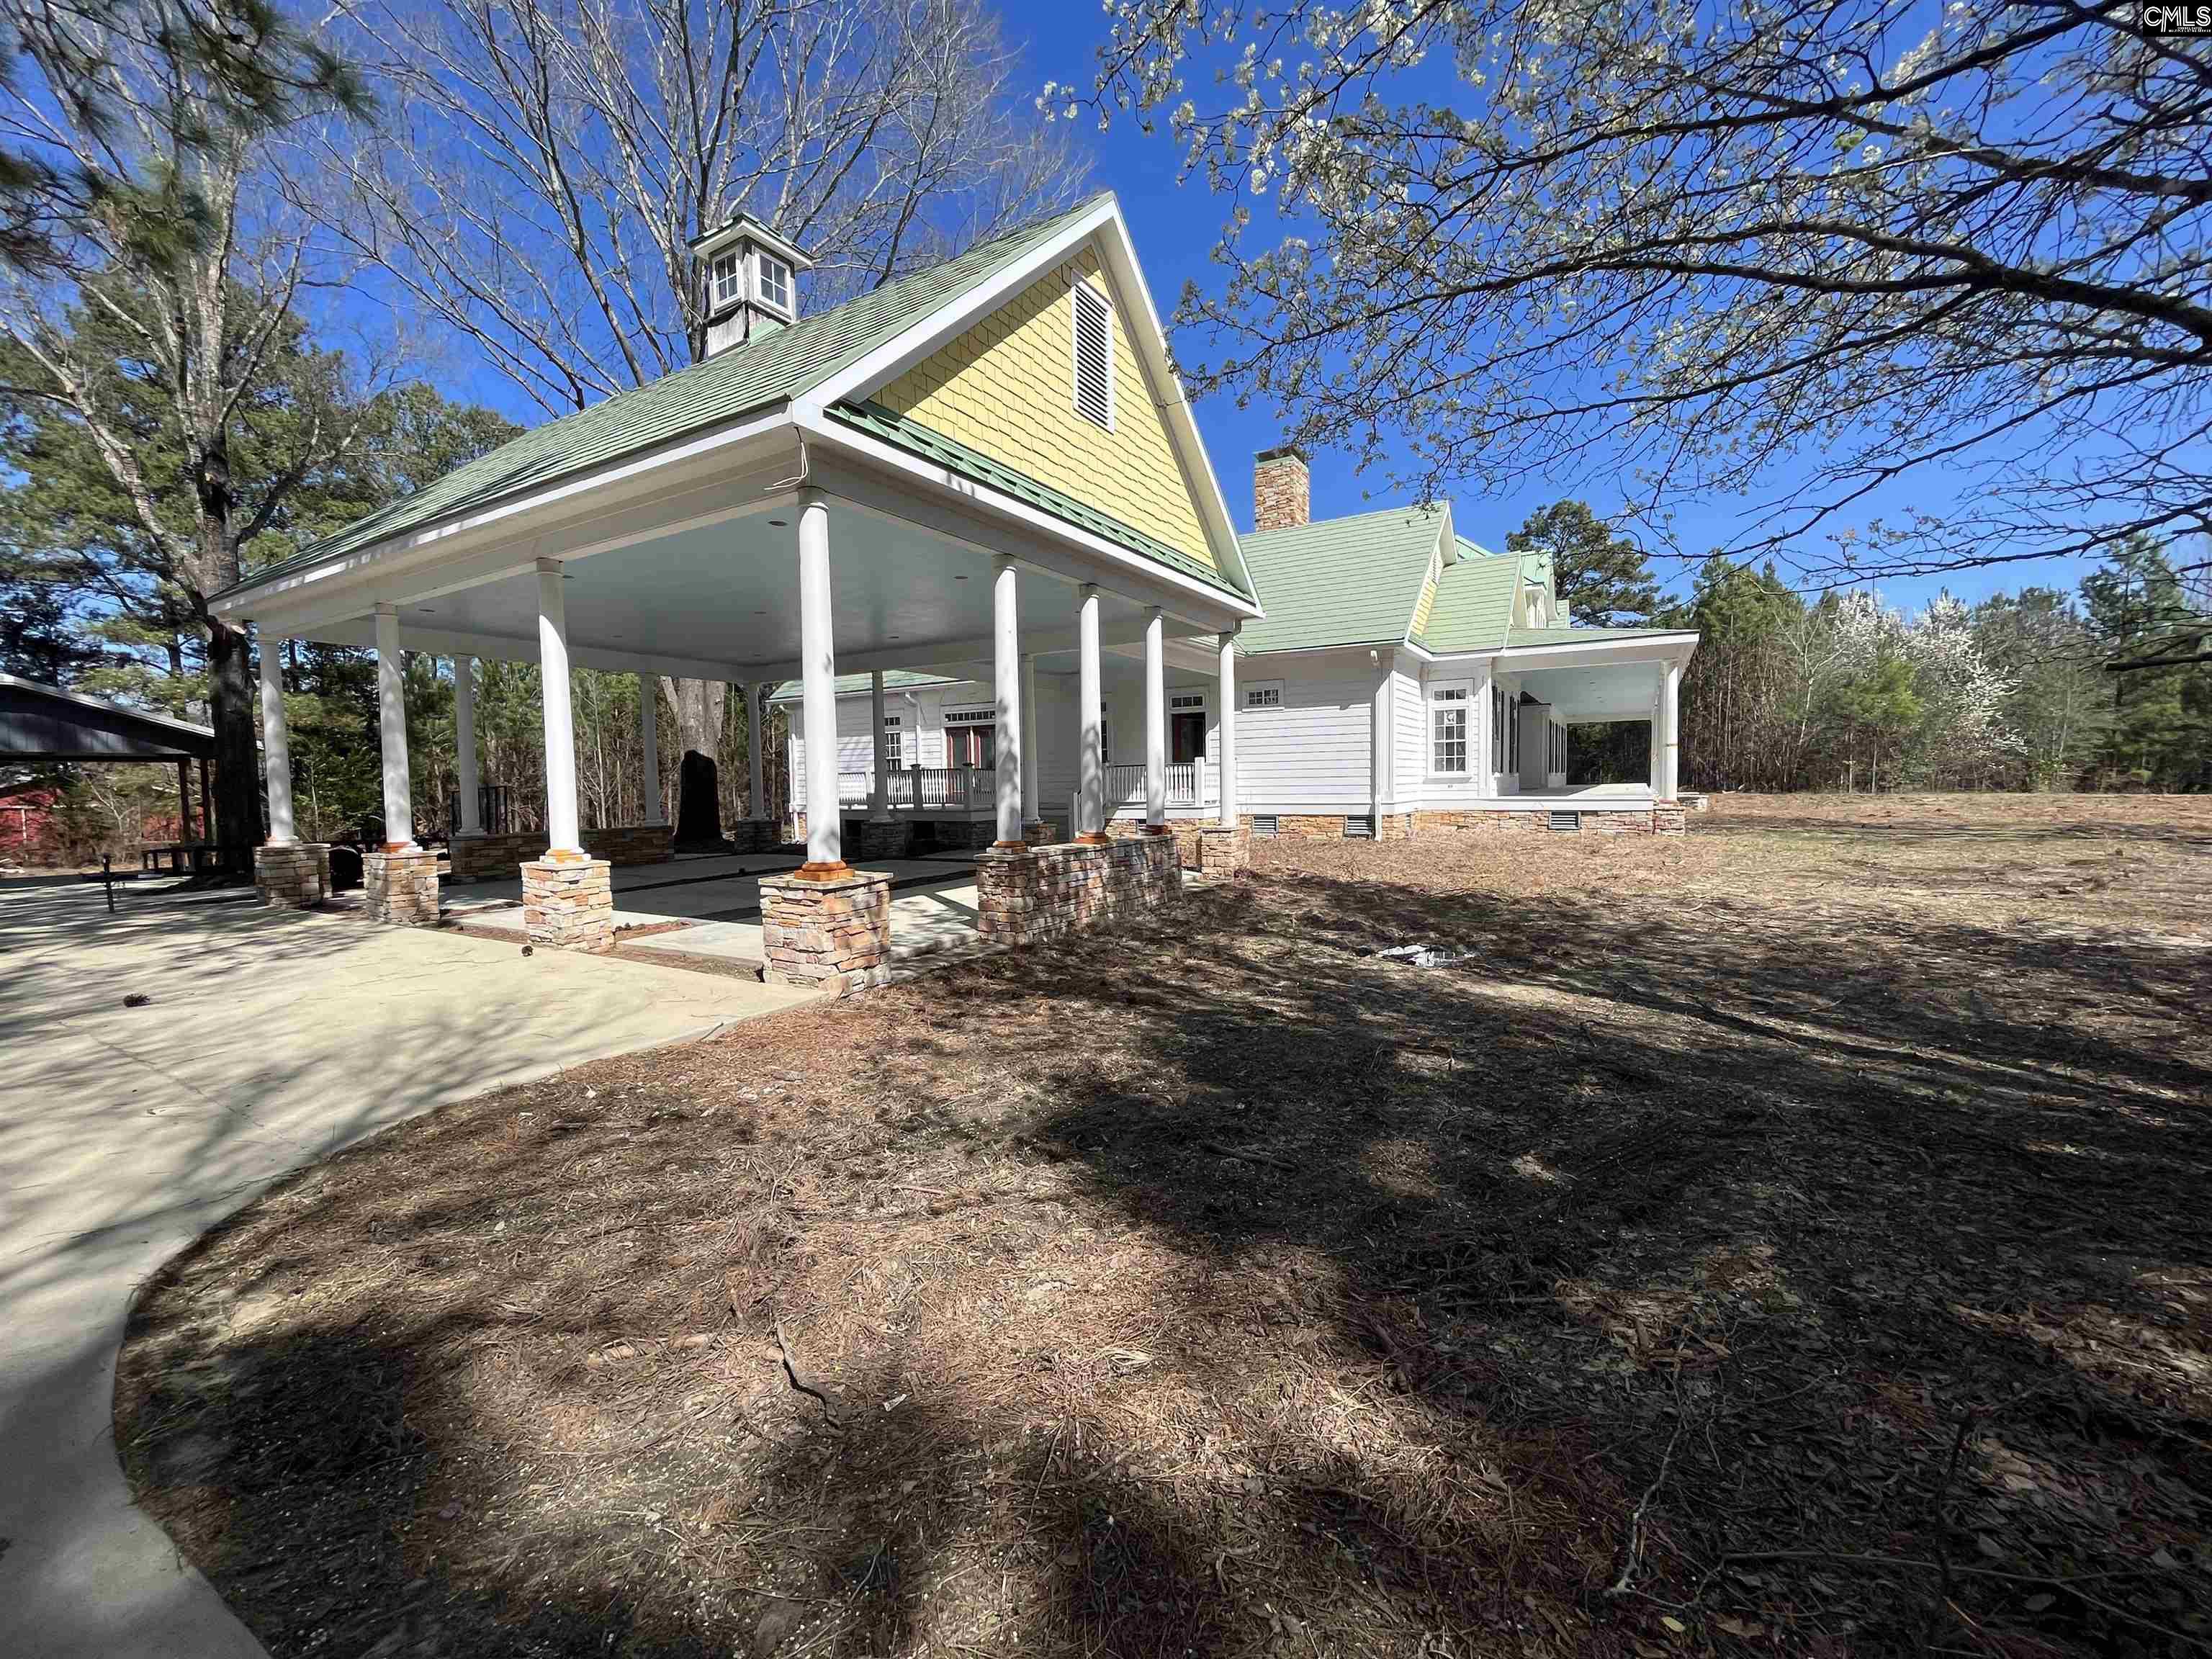 88C Tombfield Road, Camden, South Carolina, 29020, United States, 4 Bedrooms Bedrooms, ,6 BathroomsBathrooms,Residential,For Sale,88c tombfield RD,1499684